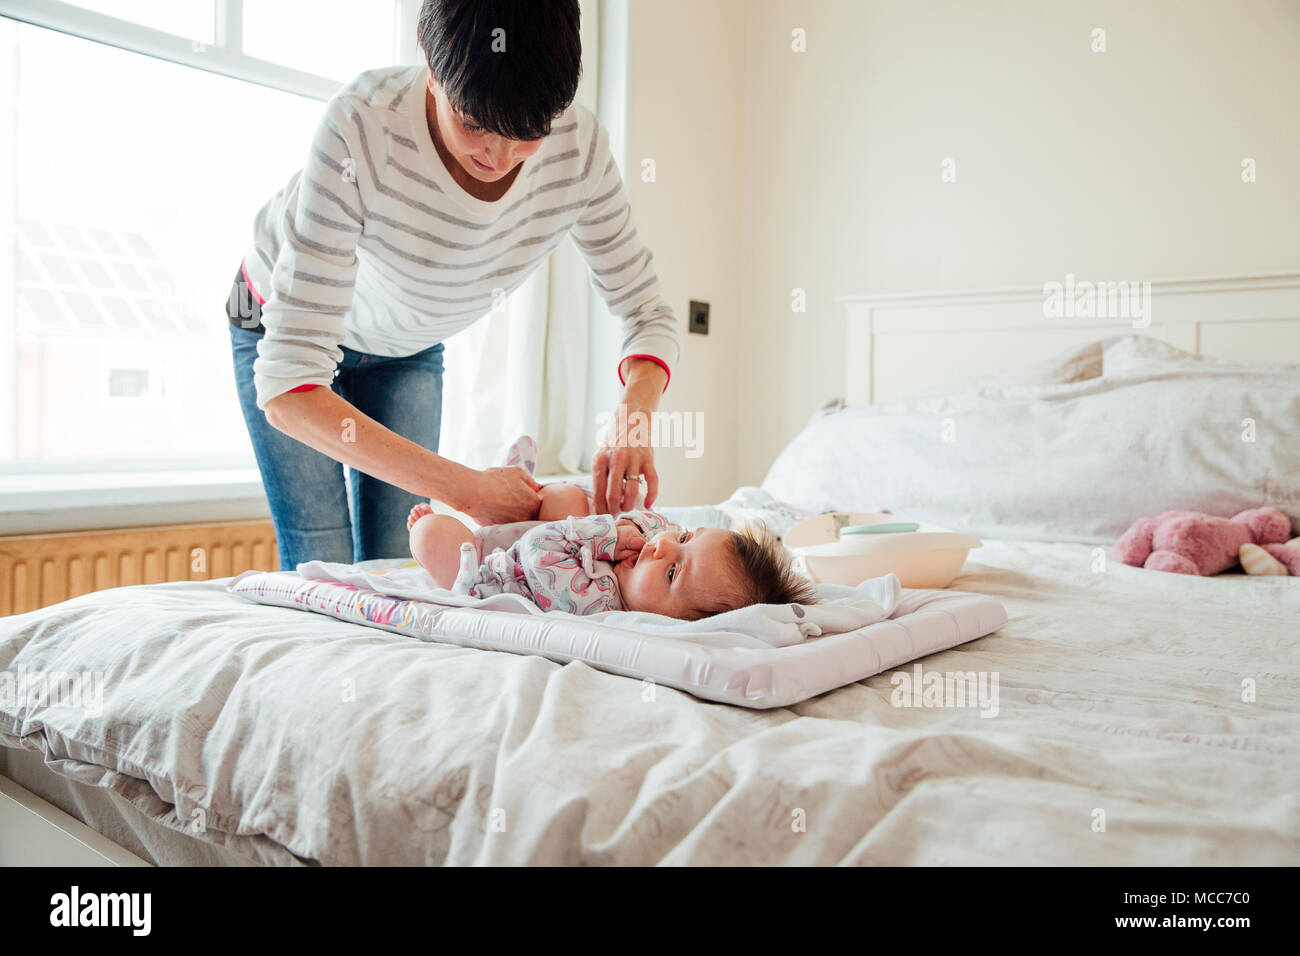 Baby has had her nappy changed by her mother on the double bed. The mother is fastening the baby grow. Stock Photo